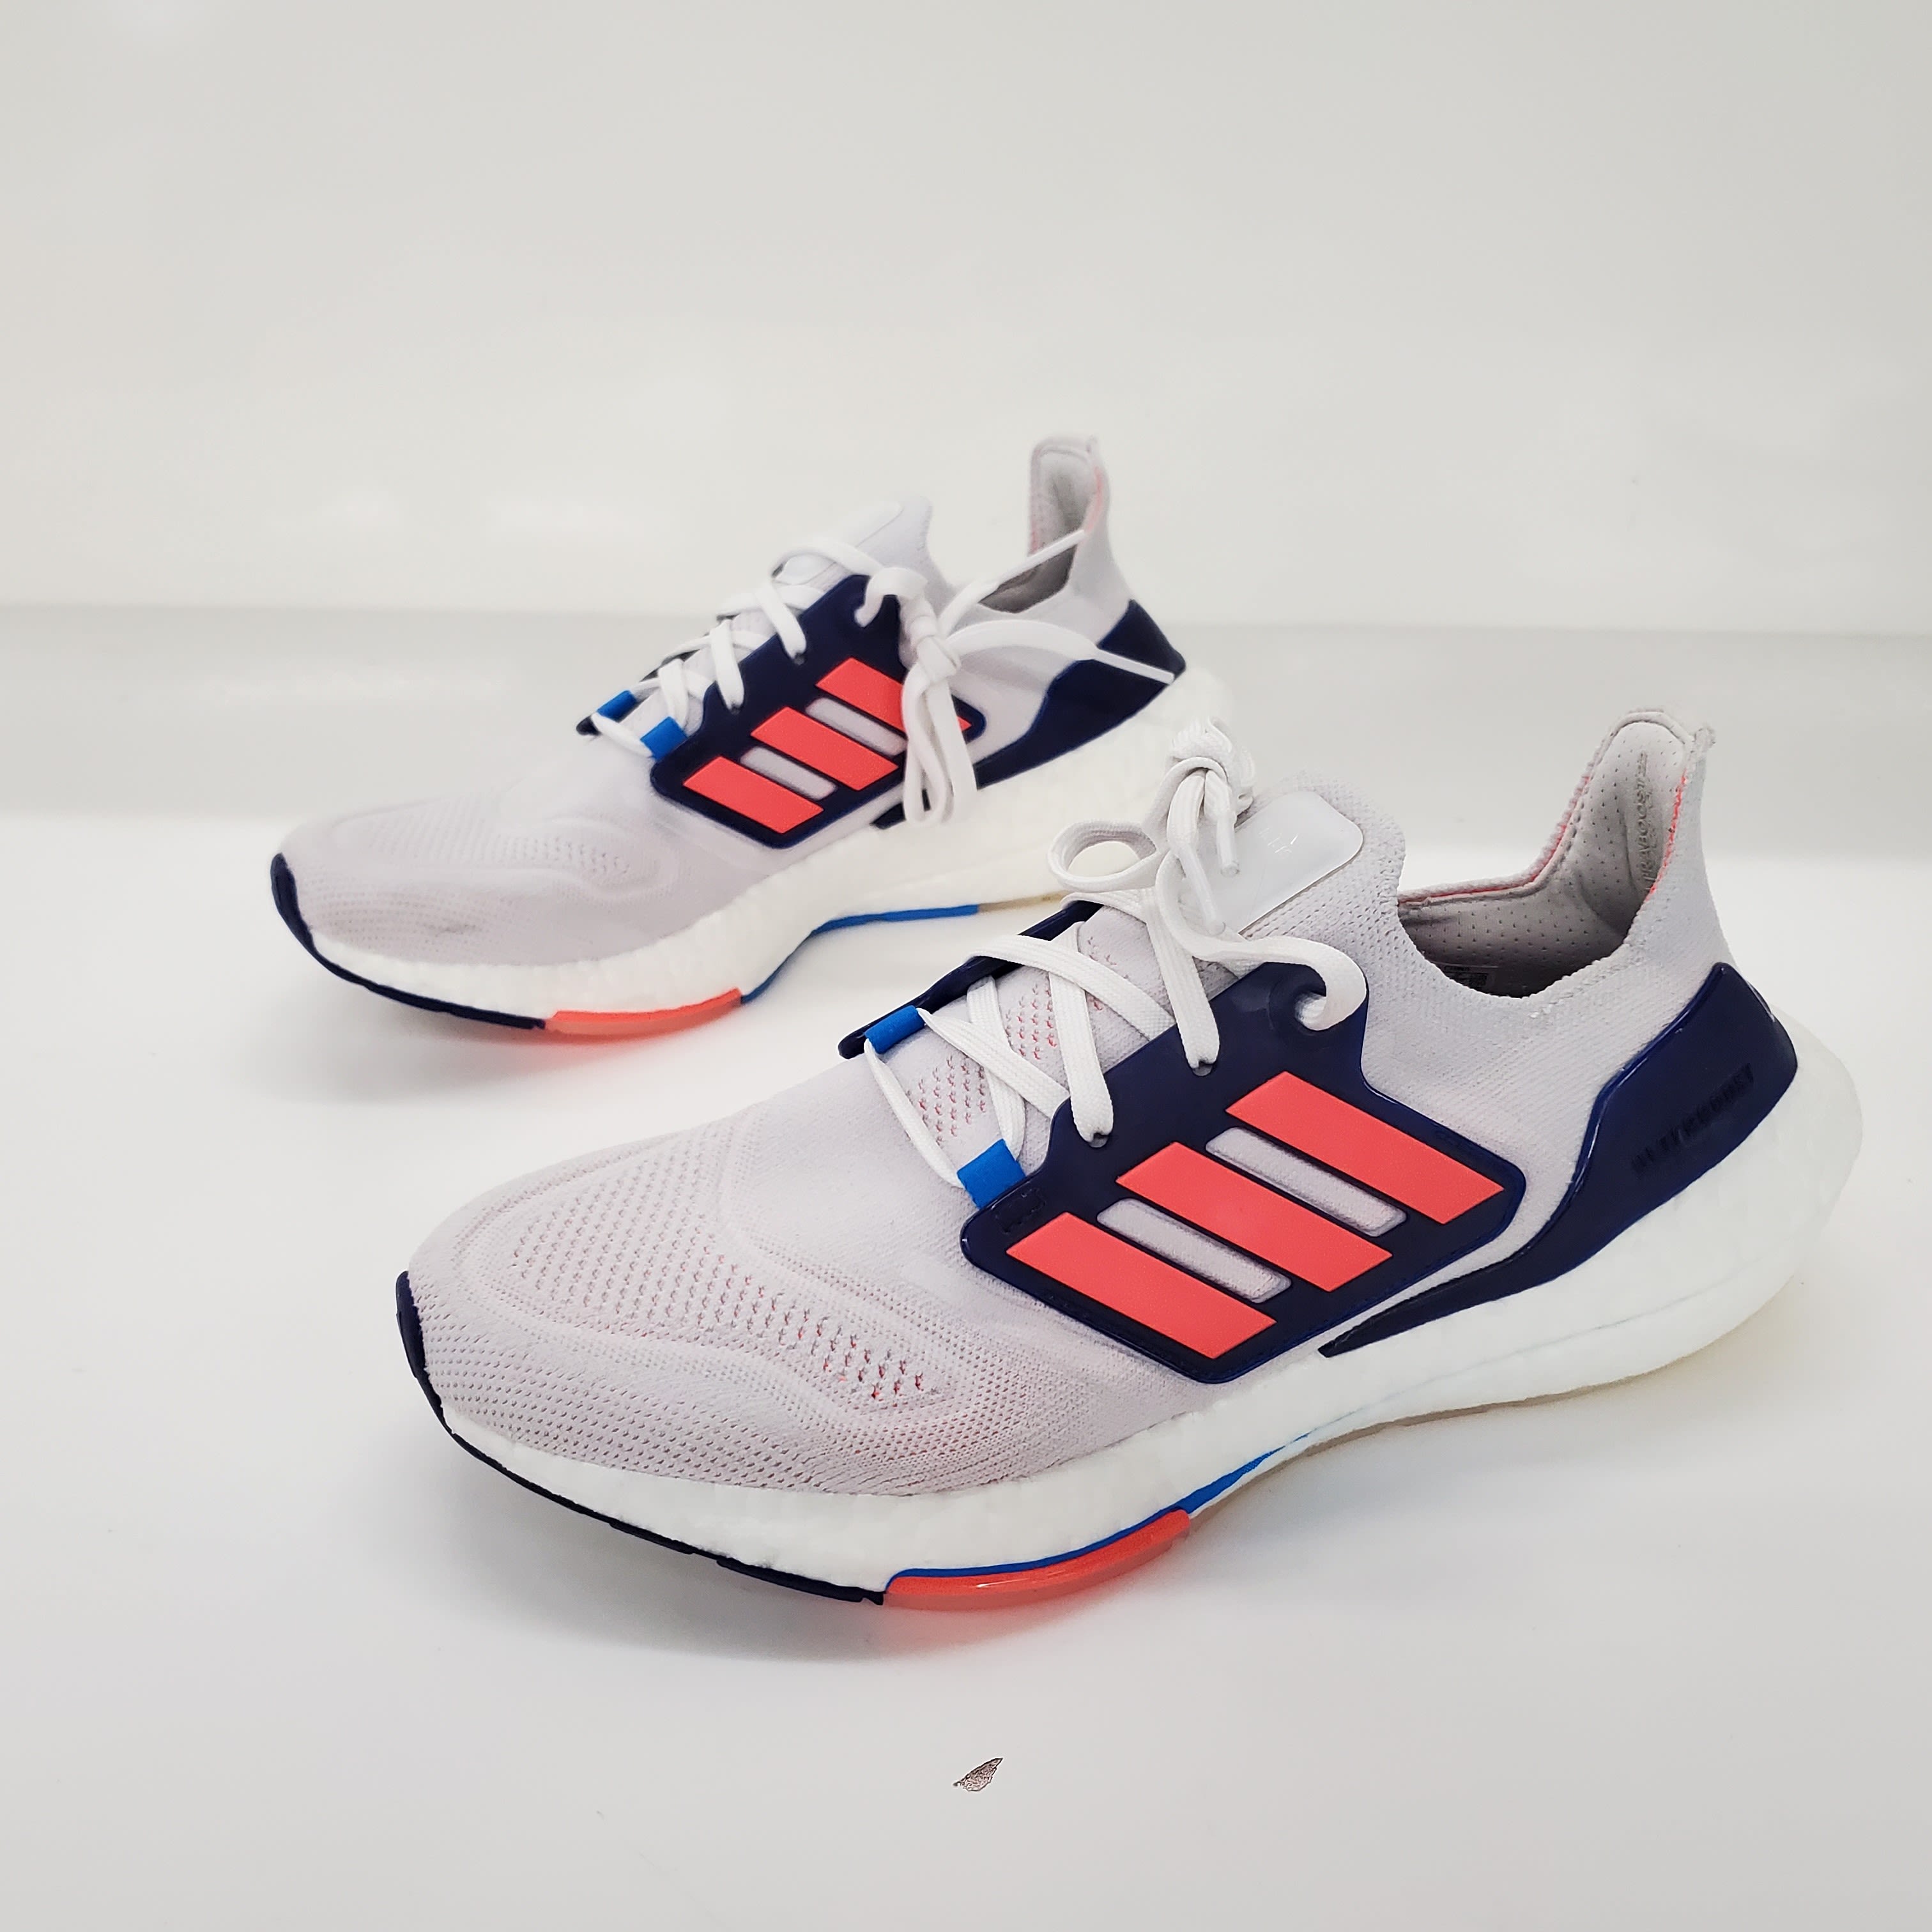 Buy Adidas UltraBoost 22 White Turbo Indigo Running Shoes Women's Size 8.5  for USD 64.99 | GoodwillFinds